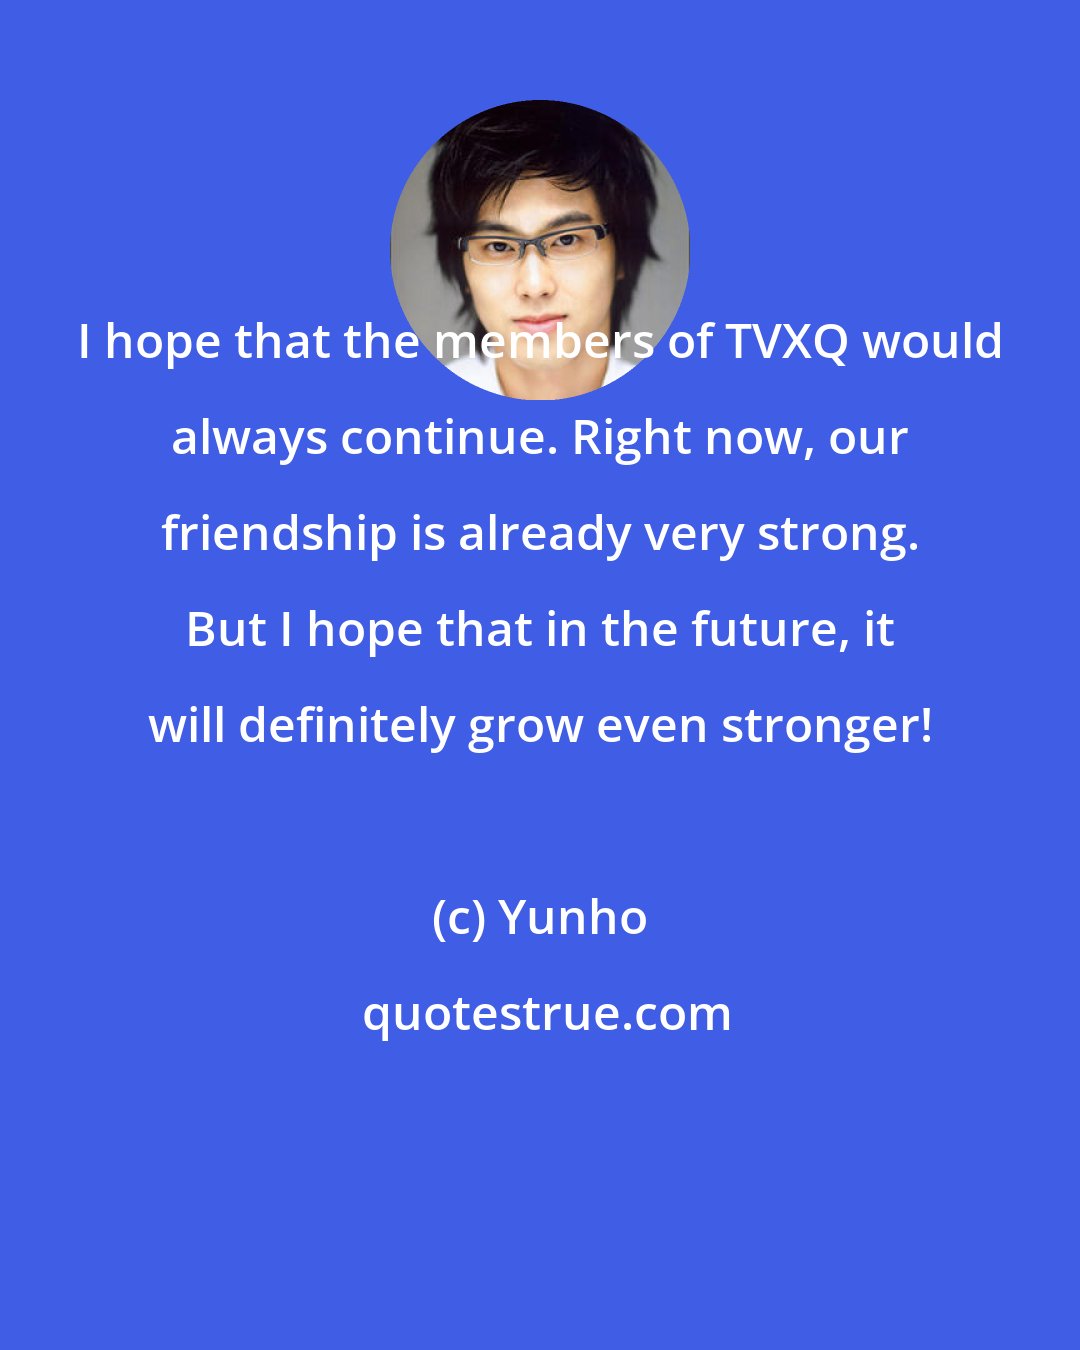 Yunho: I hope that the members of TVXQ would always continue. Right now, our friendship is already very strong. But I hope that in the future, it will definitely grow even stronger!